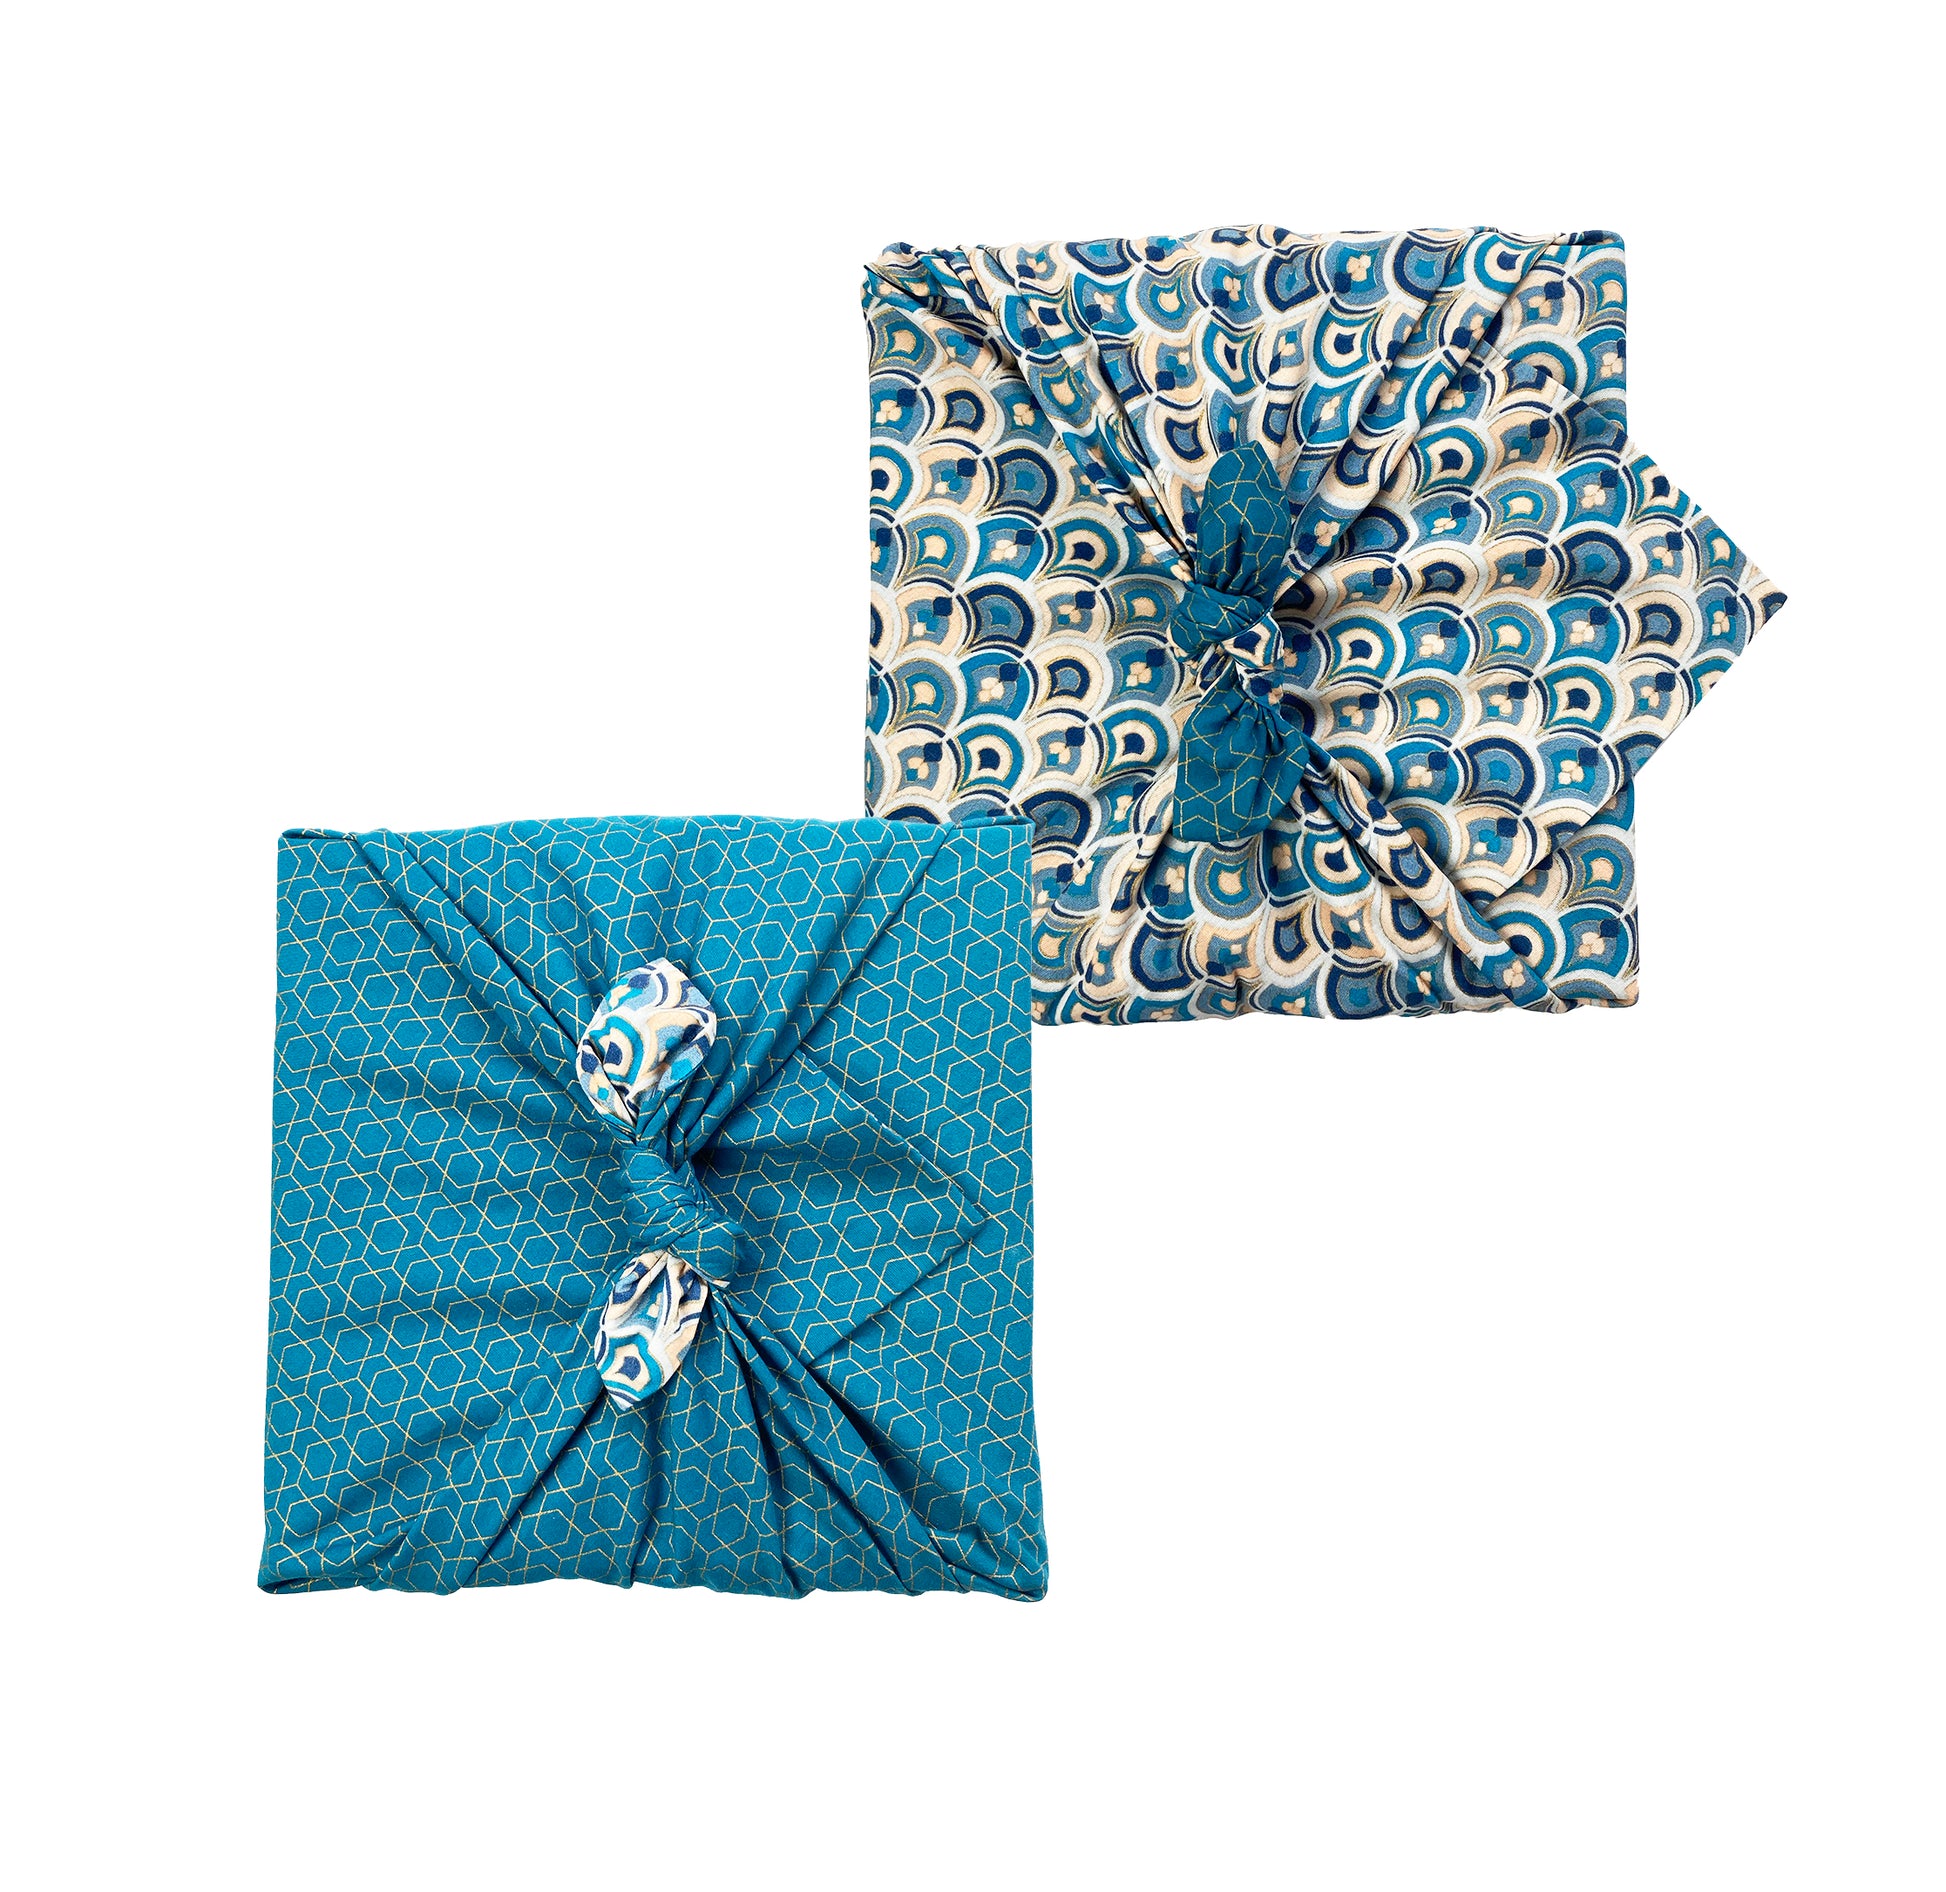 Fabric gift wrapping ocean and art deco FabRap